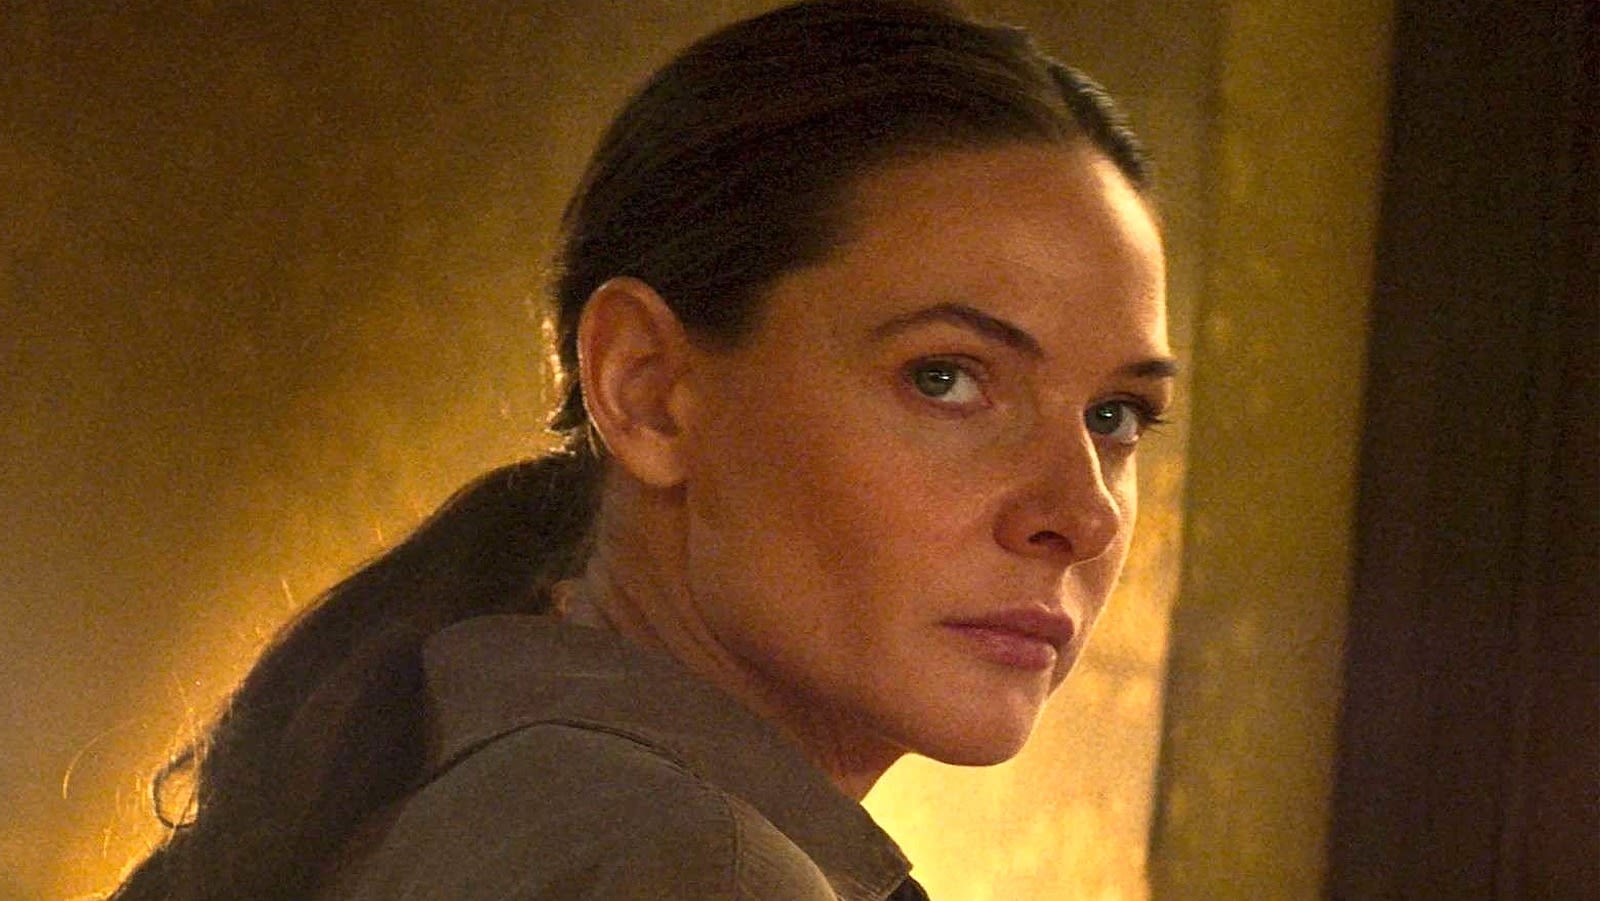 The Real Reason Rebecca Ferguson's Ilsa Faust Left The Mission: Impossible Series - Looper